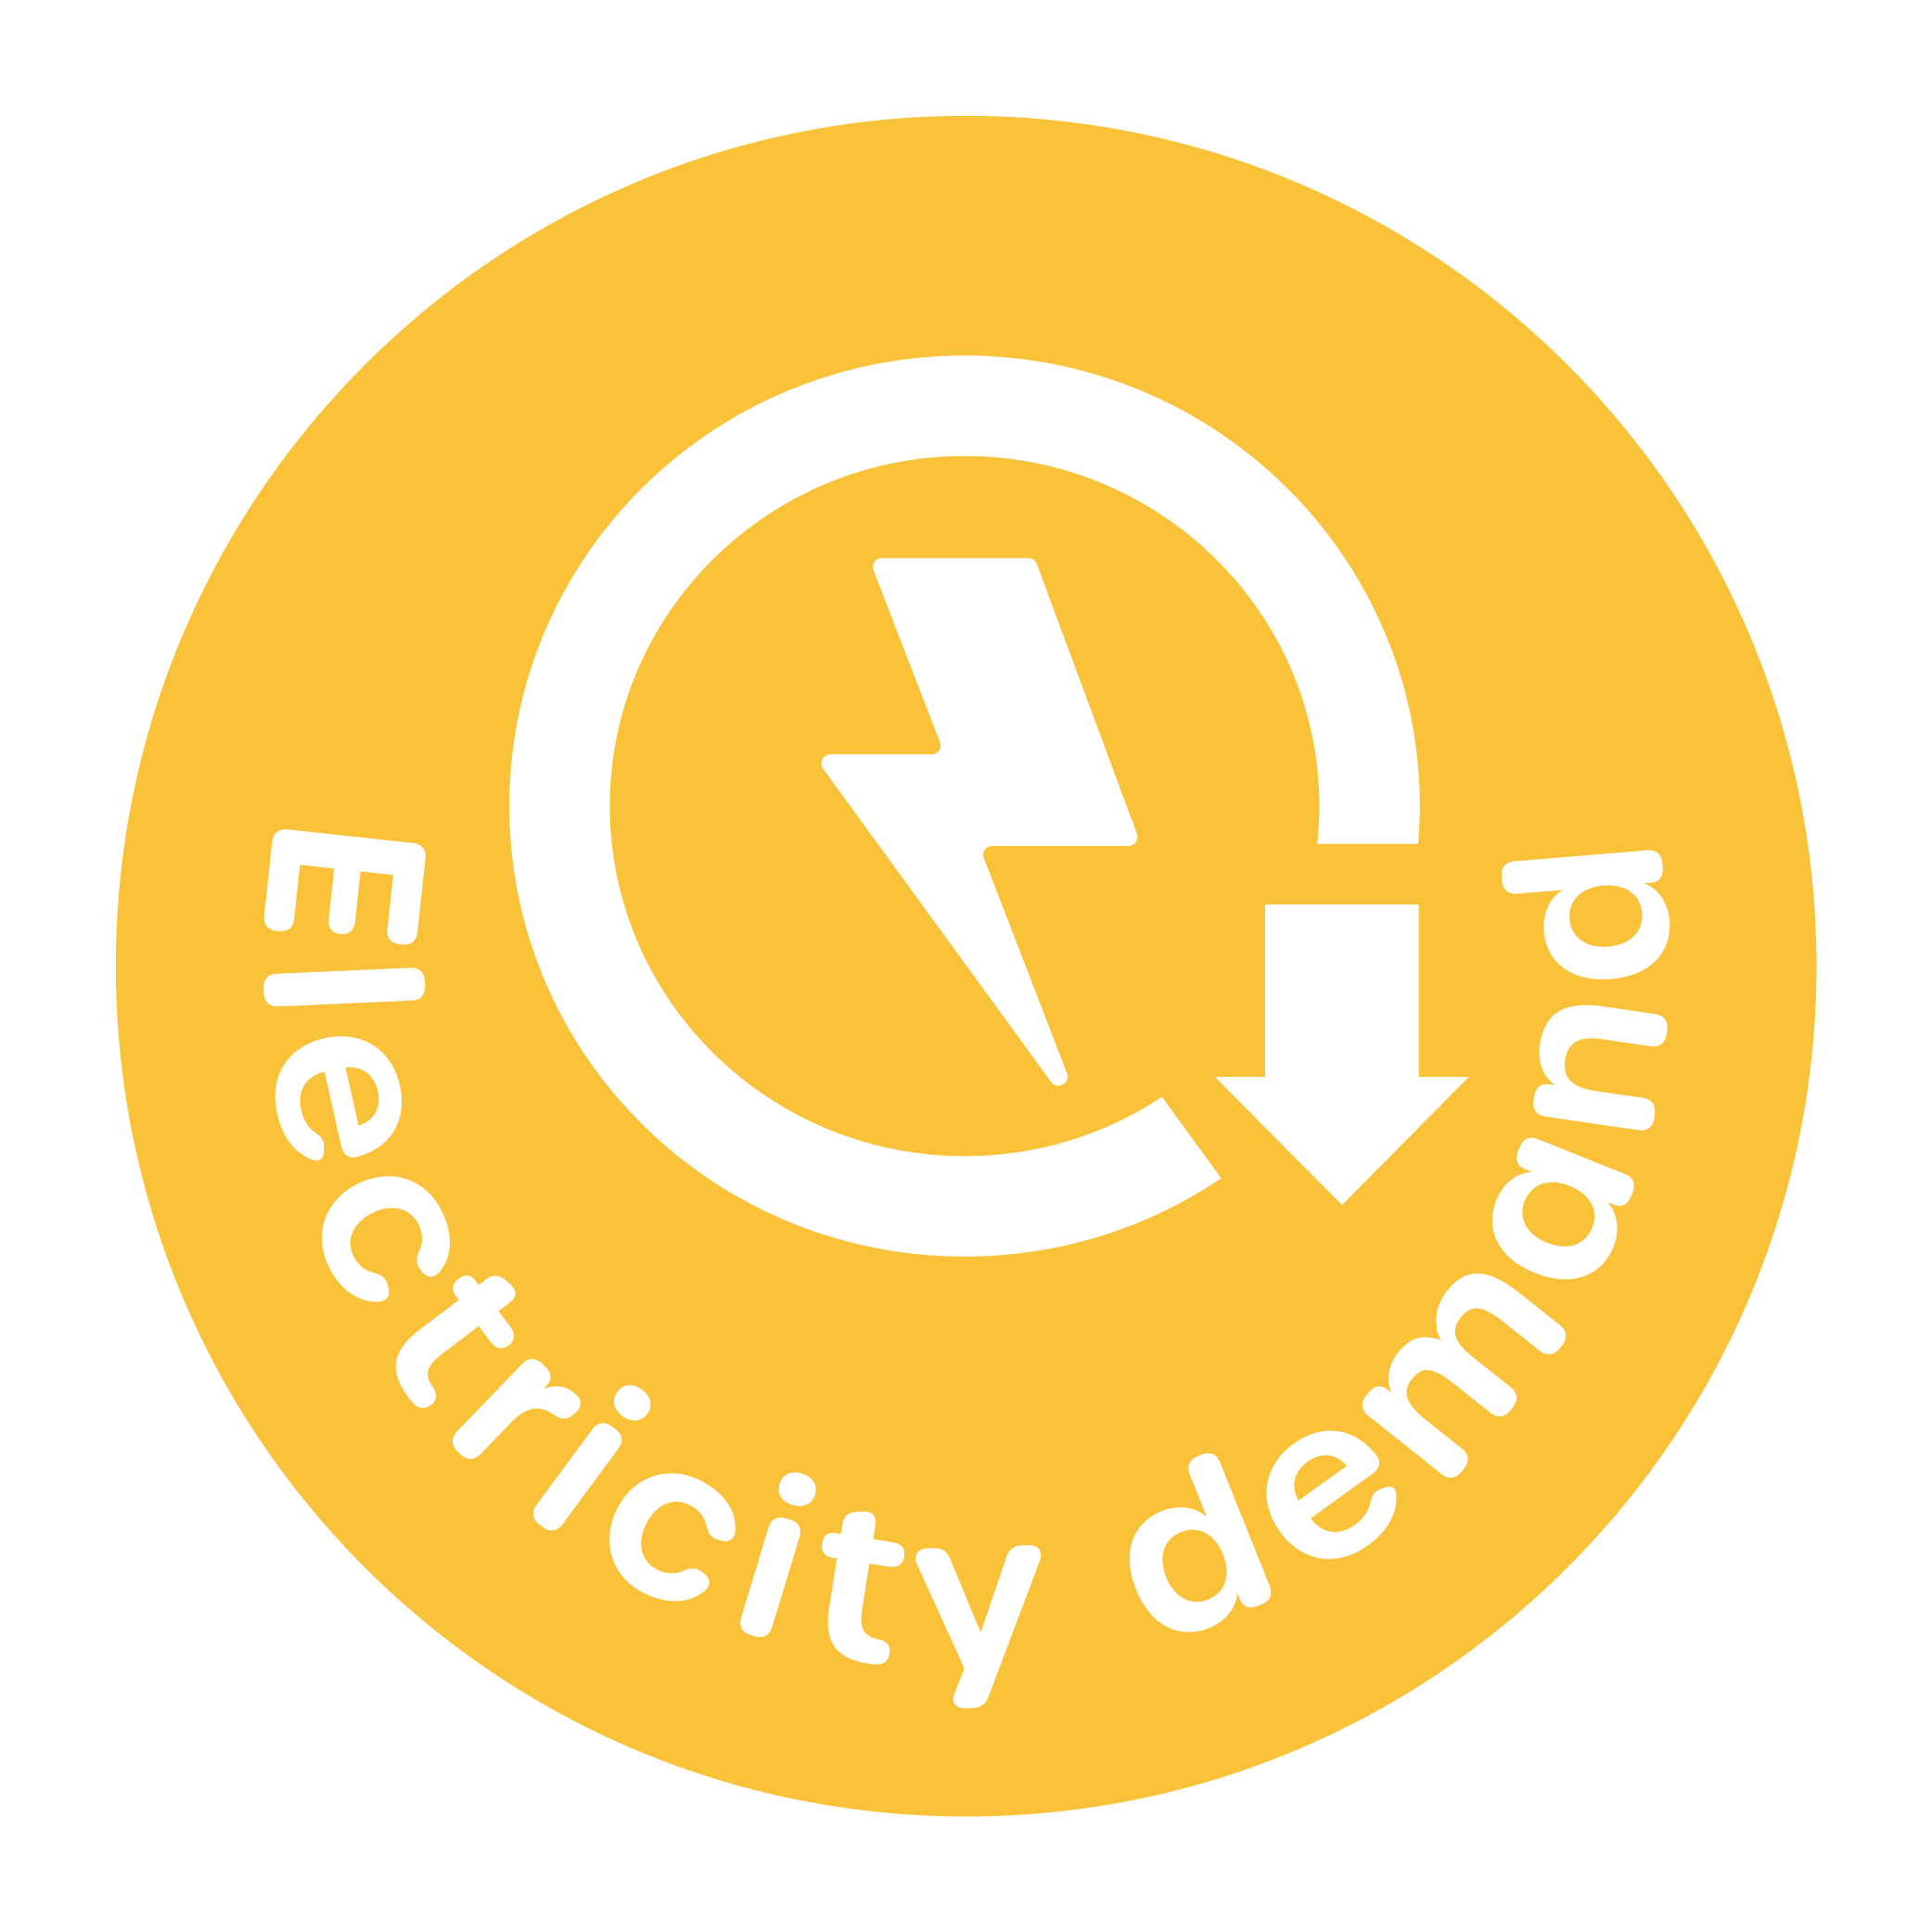 Energy is a cost driver. We reduce the overall energy demand up to 50%.